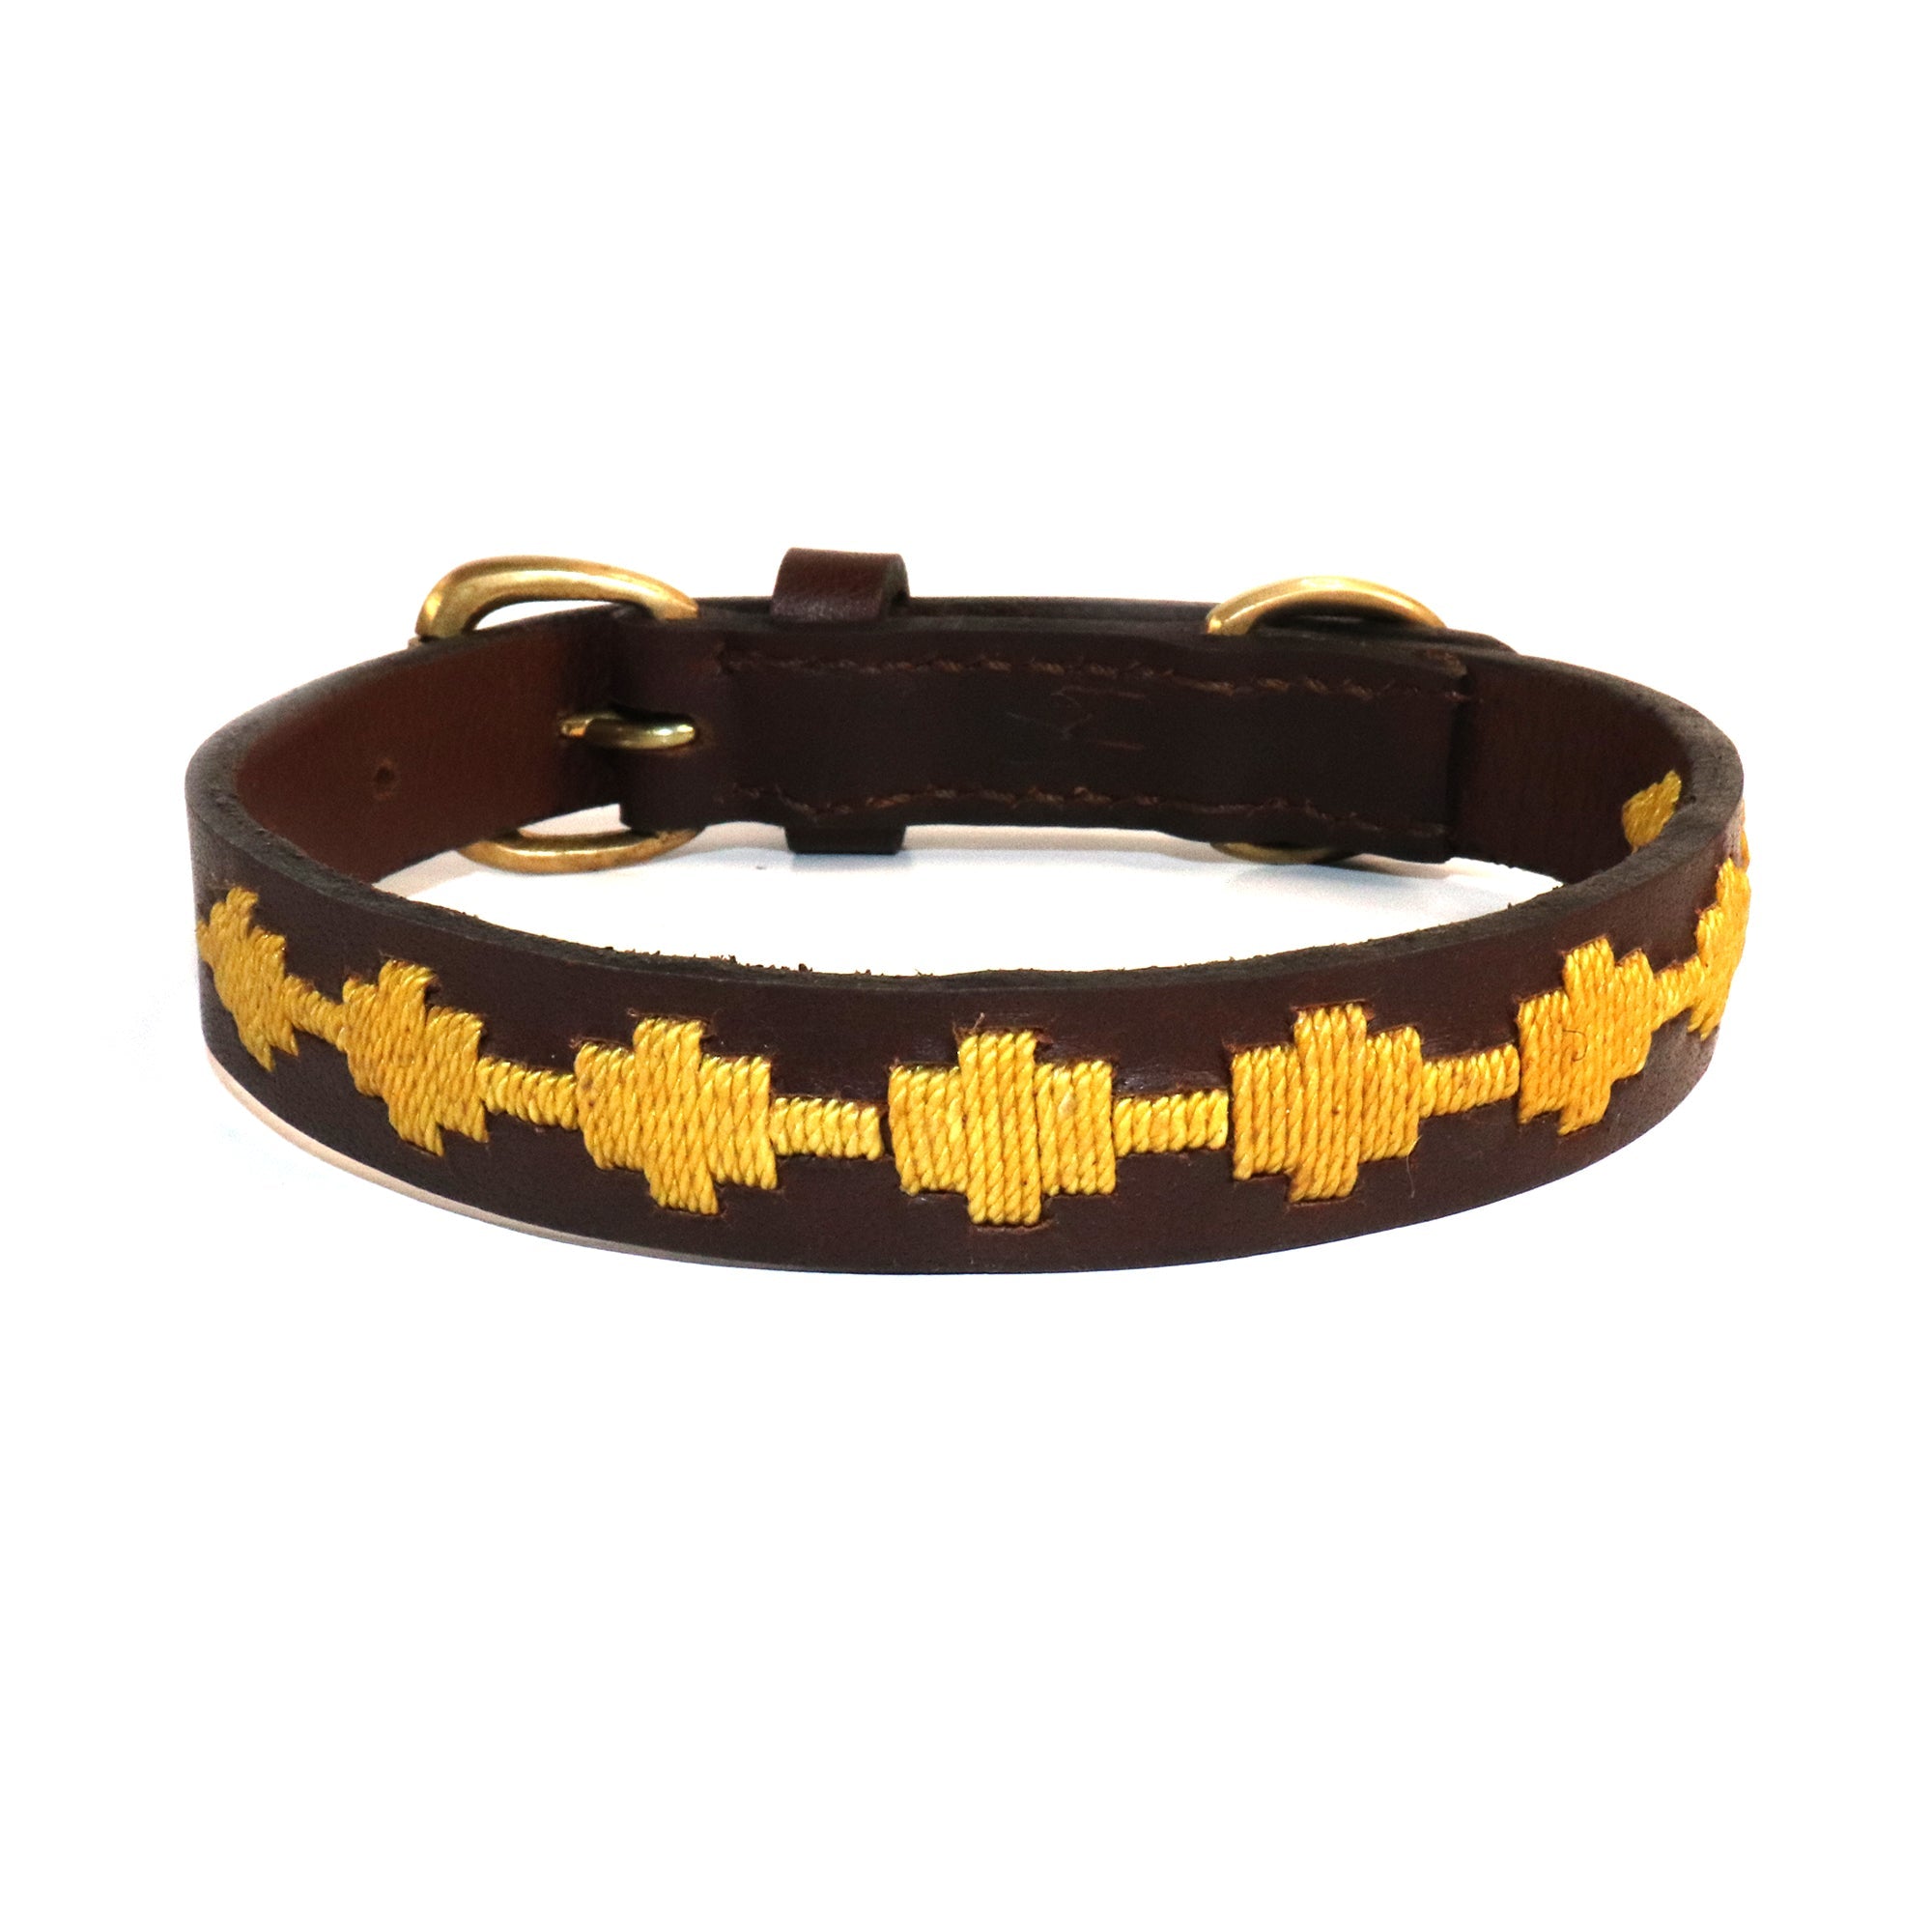 A cute bark collar for dogs made of compostable wheat material with yellow stitching by Georgie Paws.